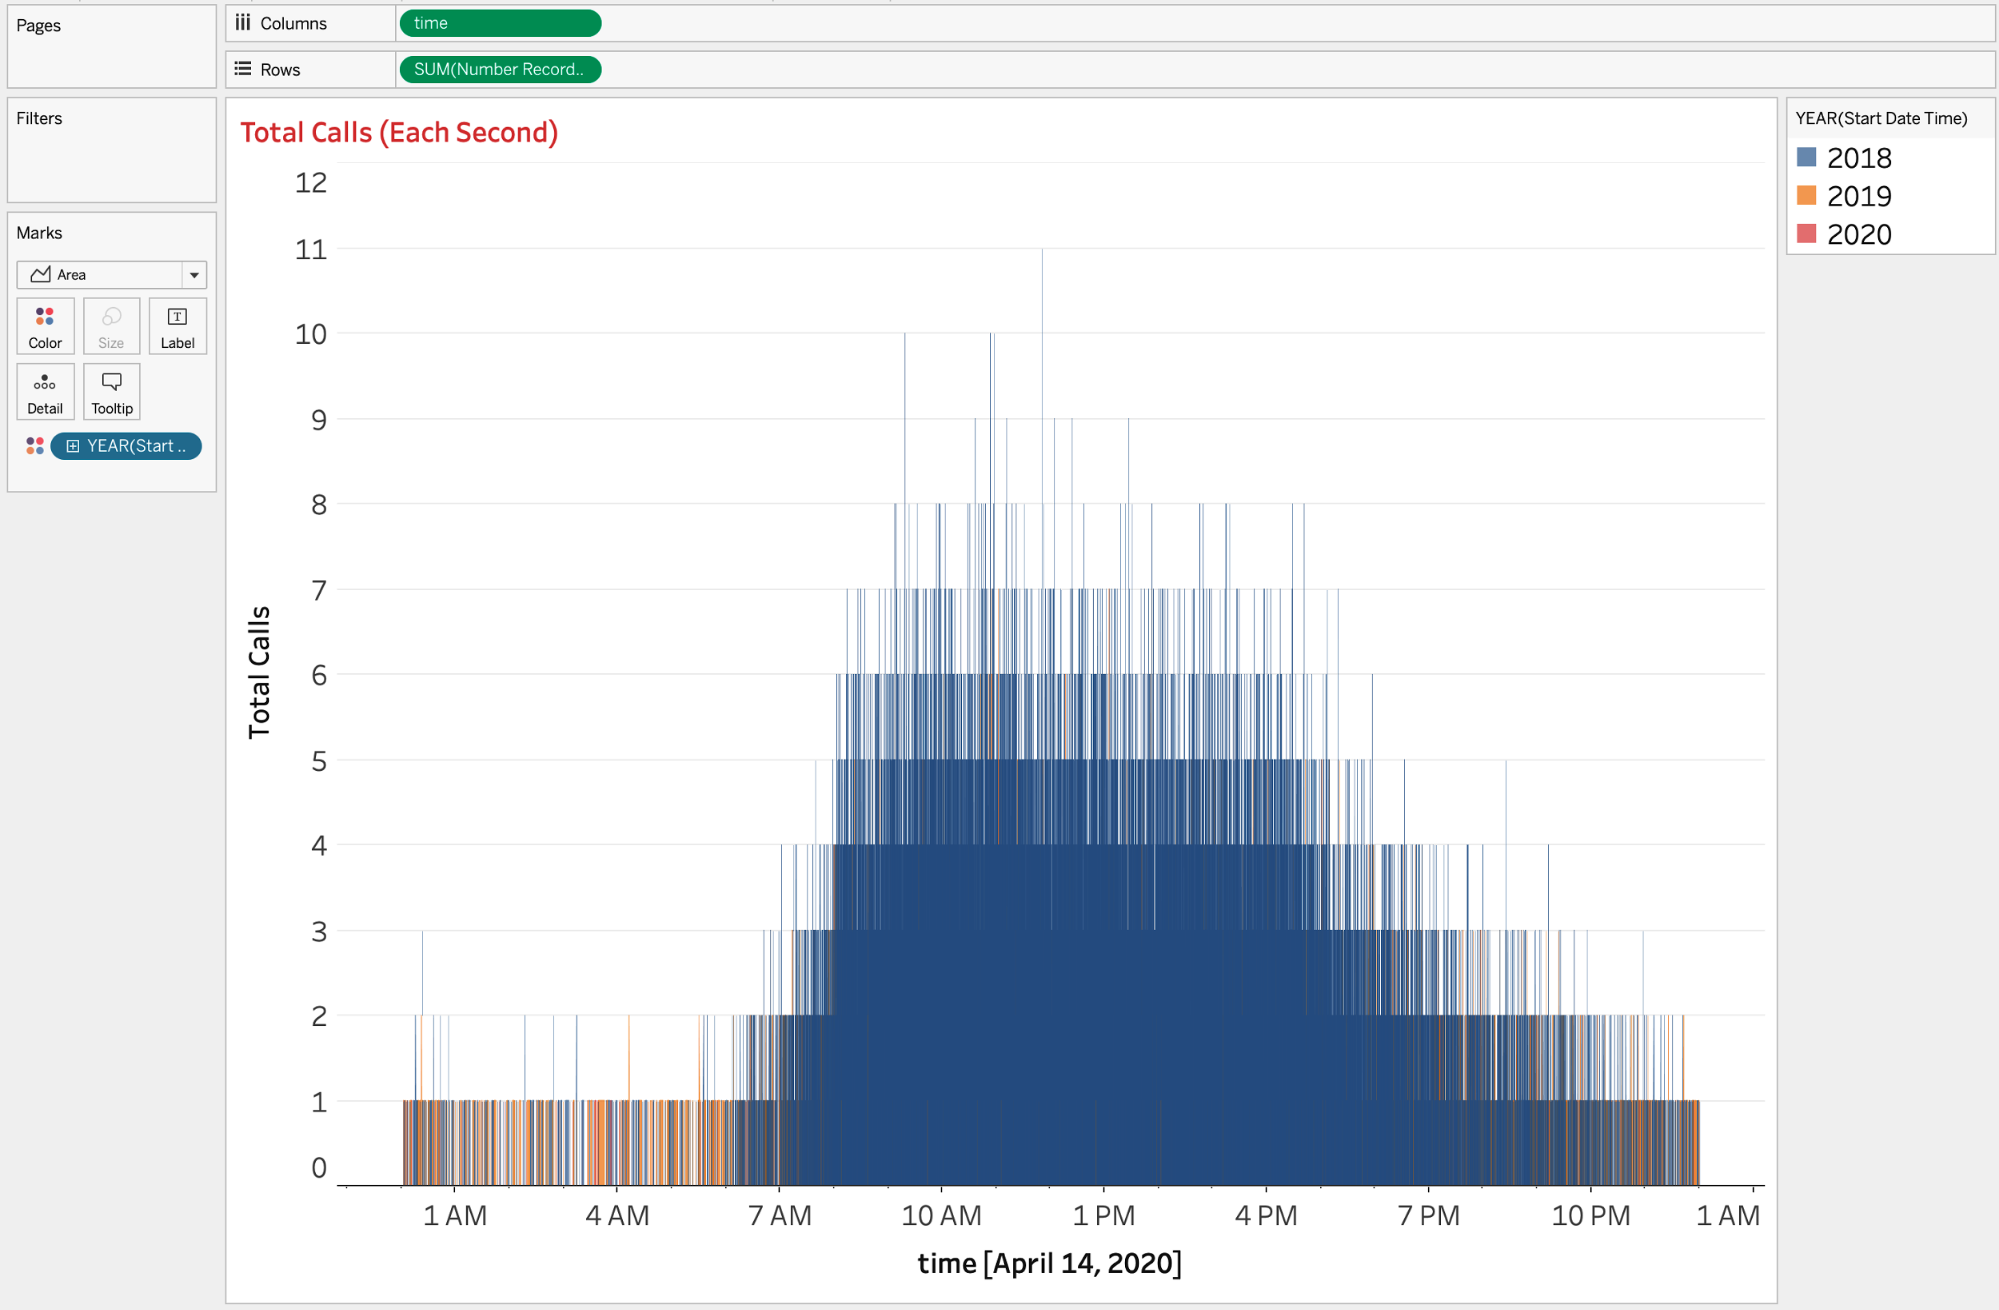 Total calls per second of the day using a continuous axis